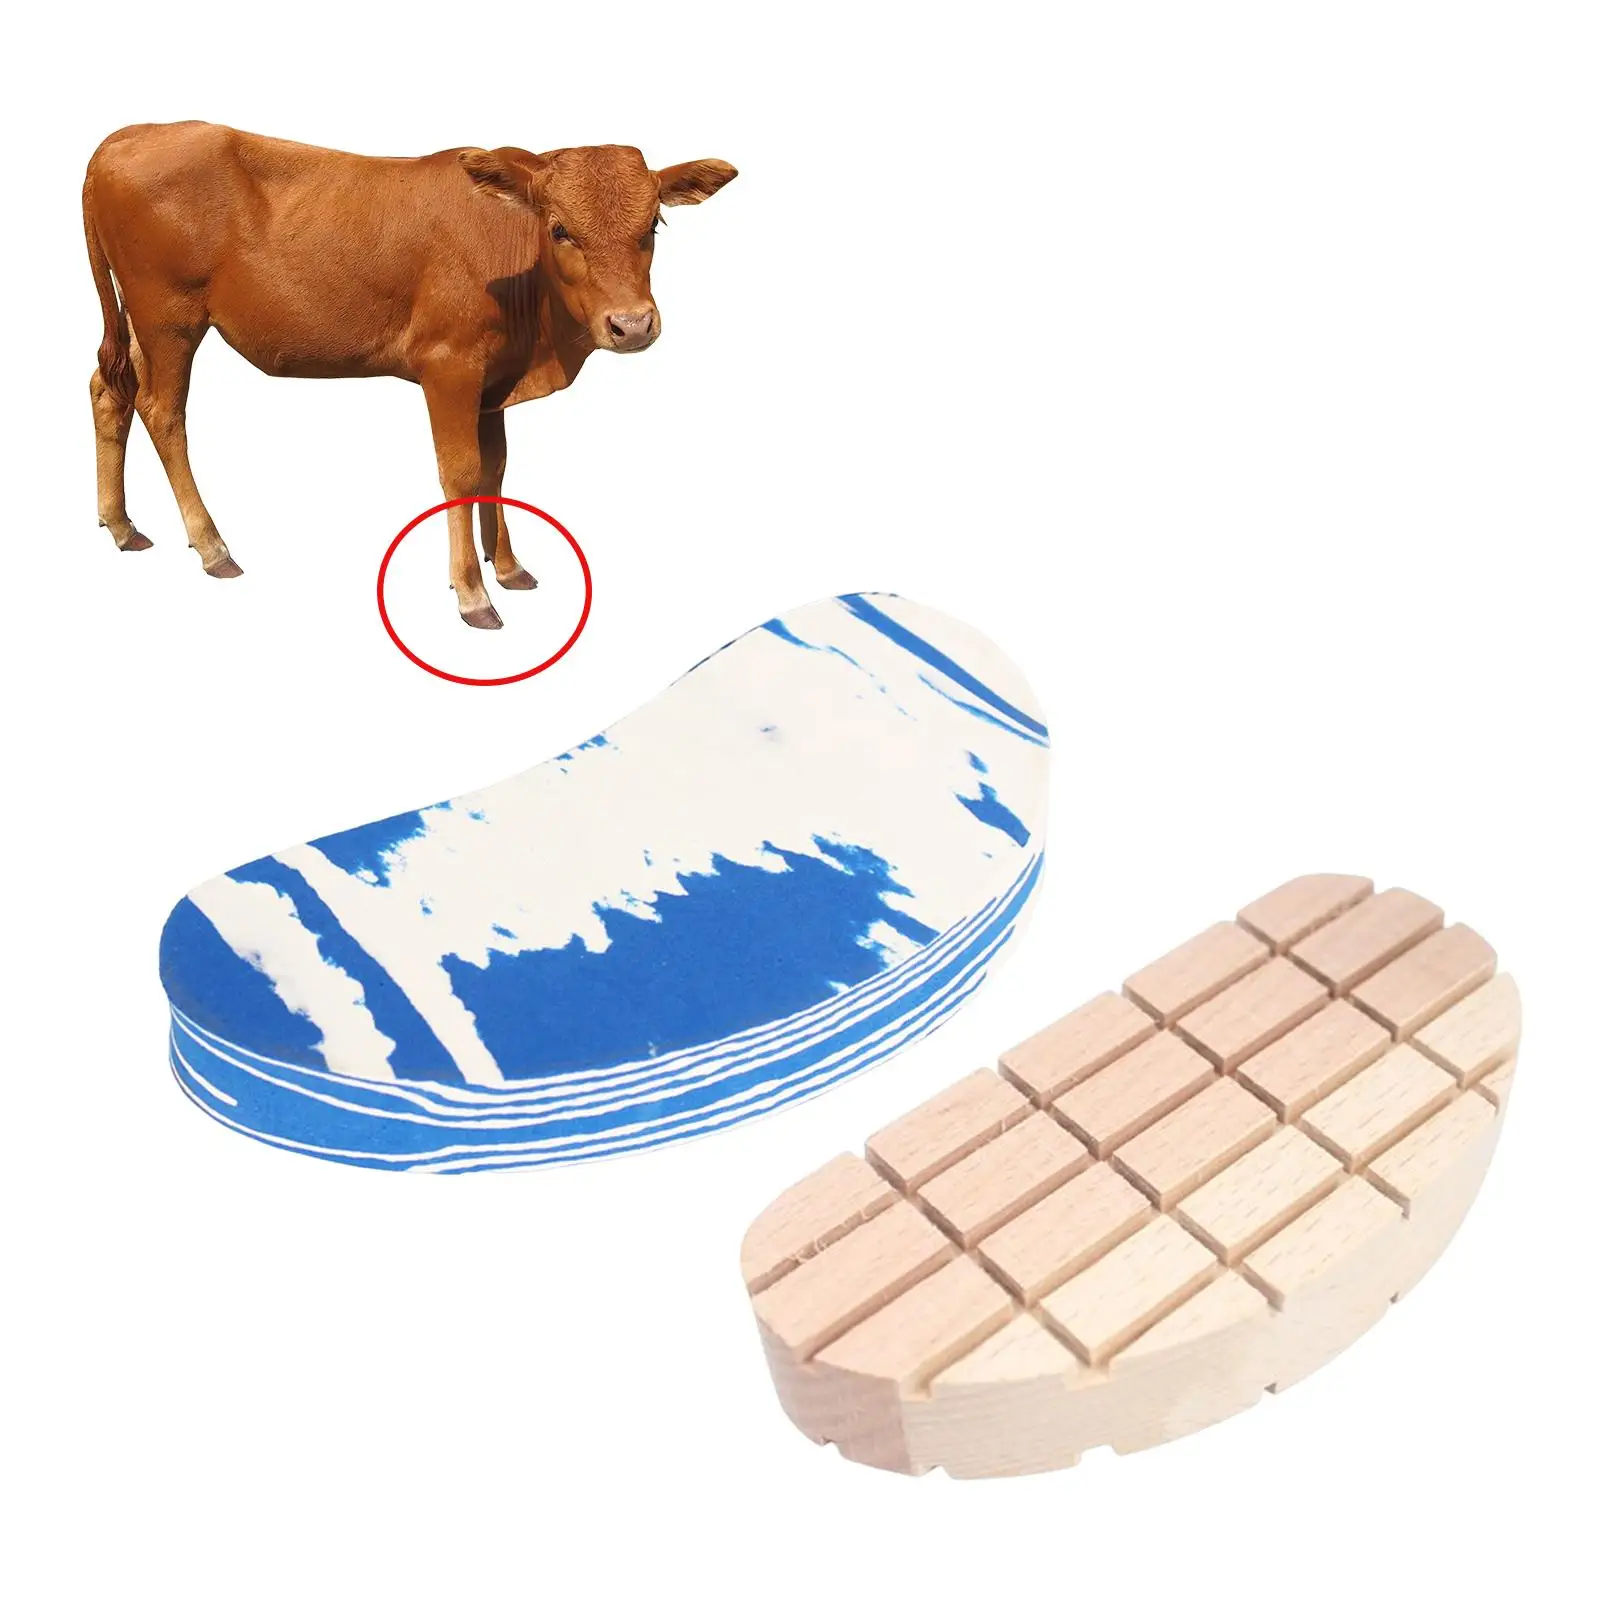 Cow Hoof Pad Repair Tool Manicure Care Accessories Cow Trimming Cushion for Cow Livestock